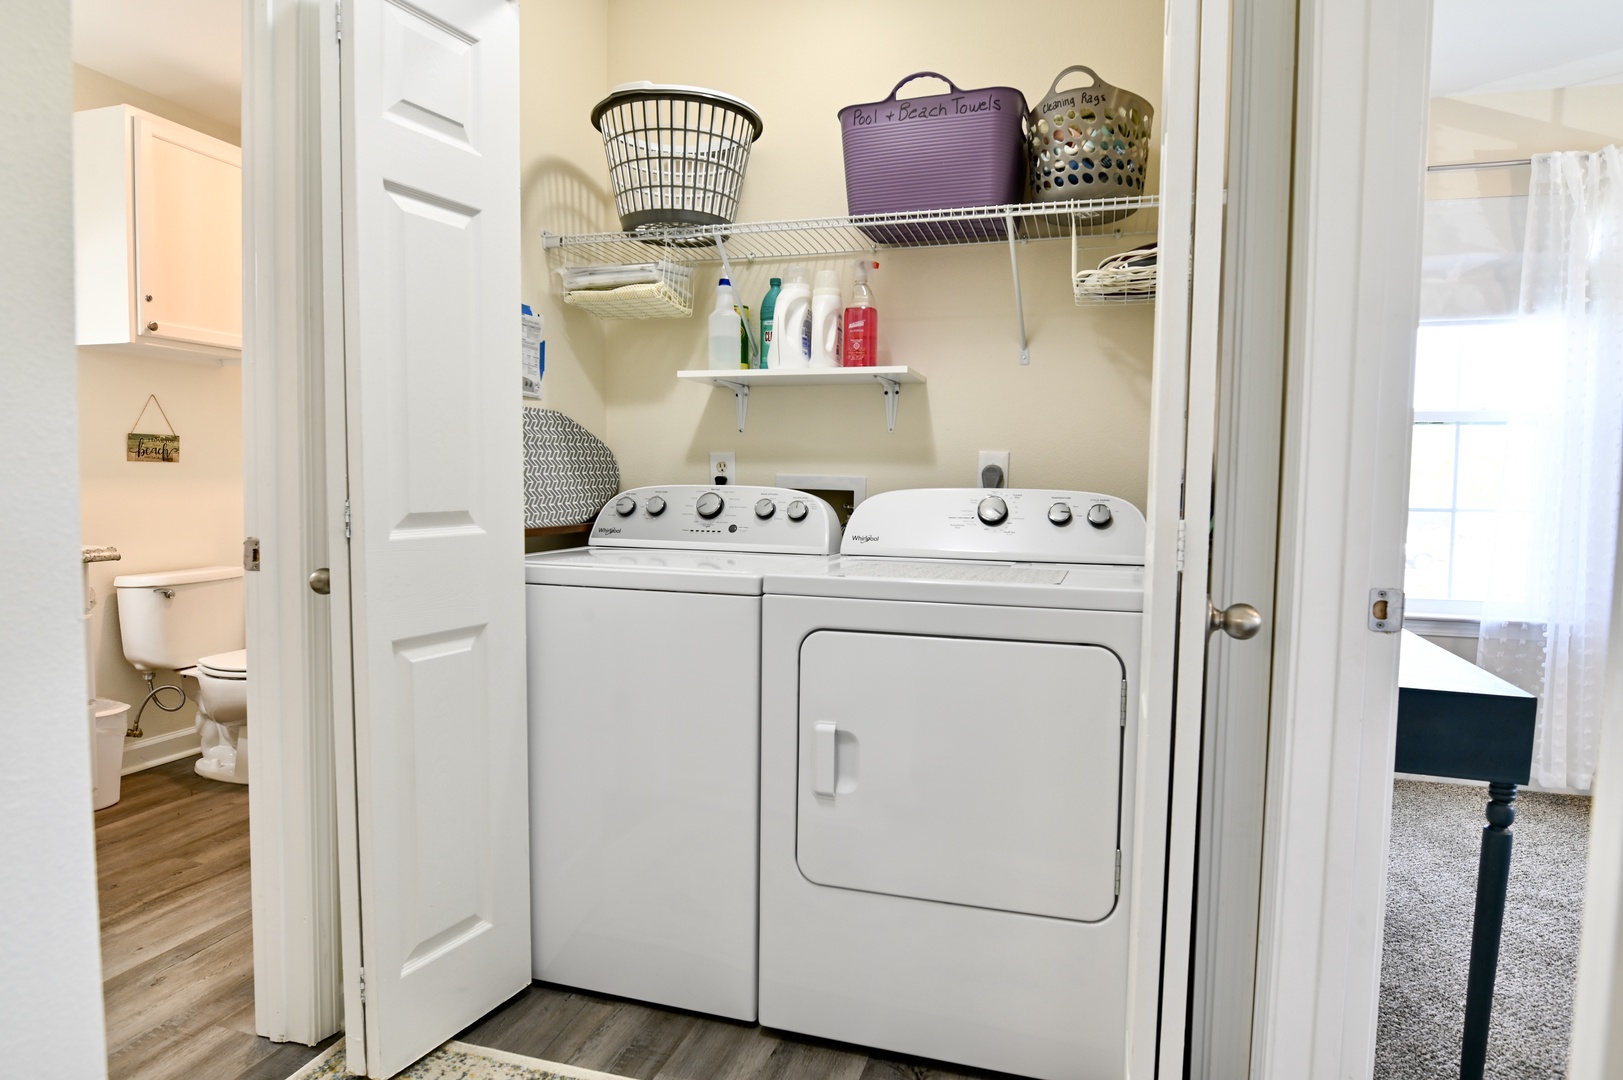 Laundry closet with washer and dryer